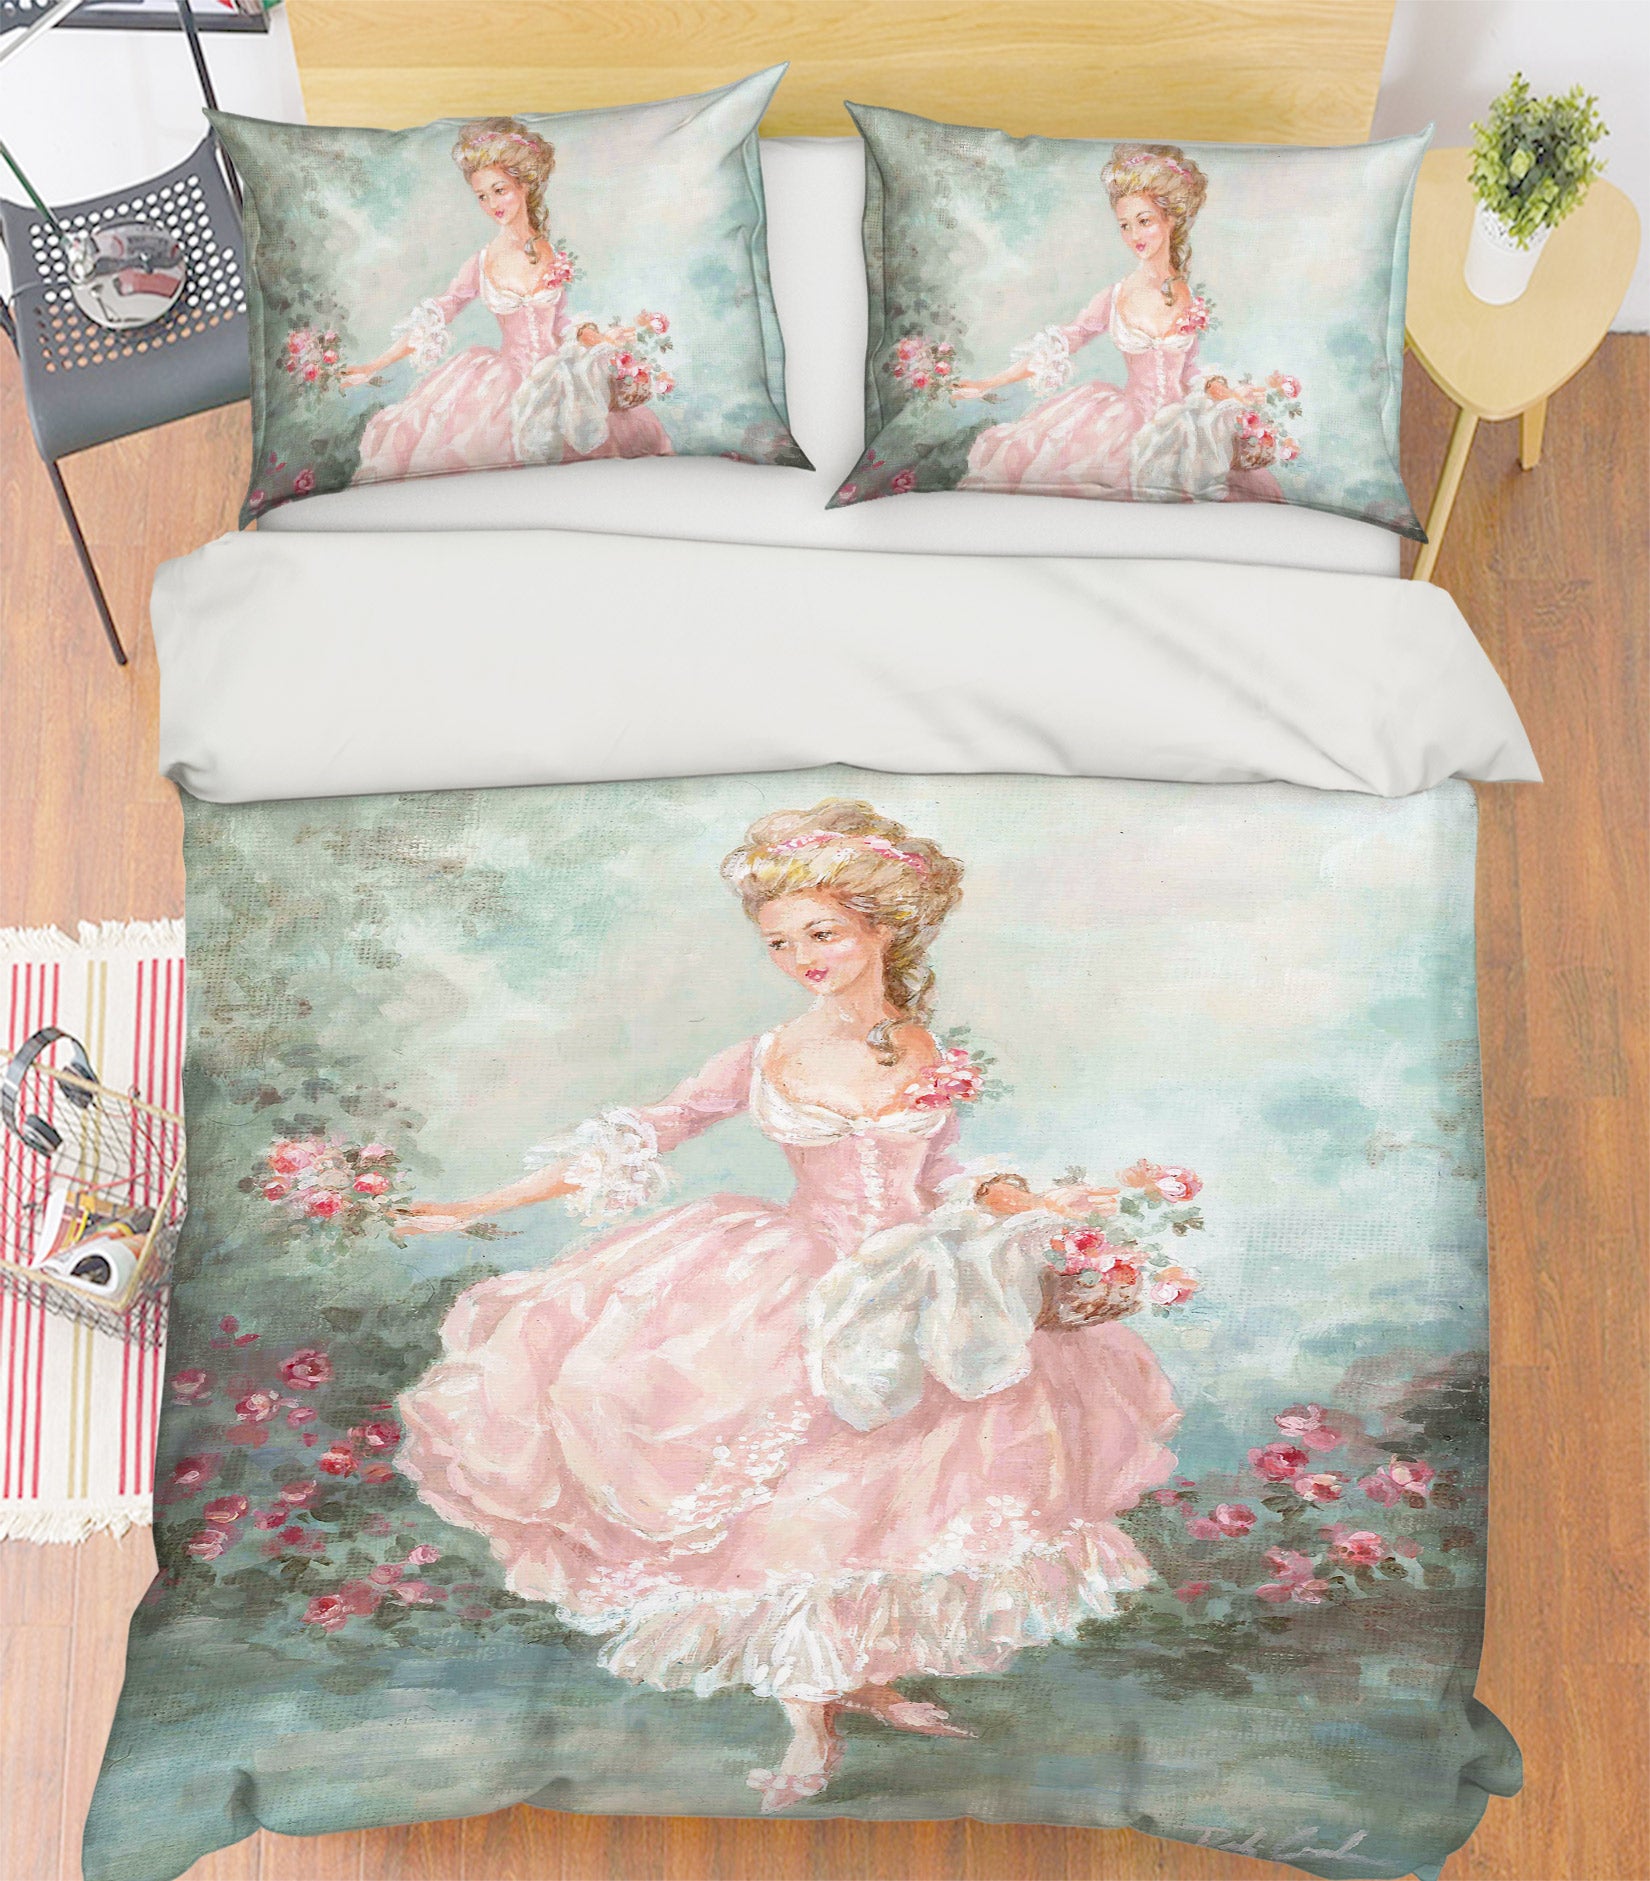 3D Lady Garden 2111 Debi Coules Bedding Bed Pillowcases Quilt